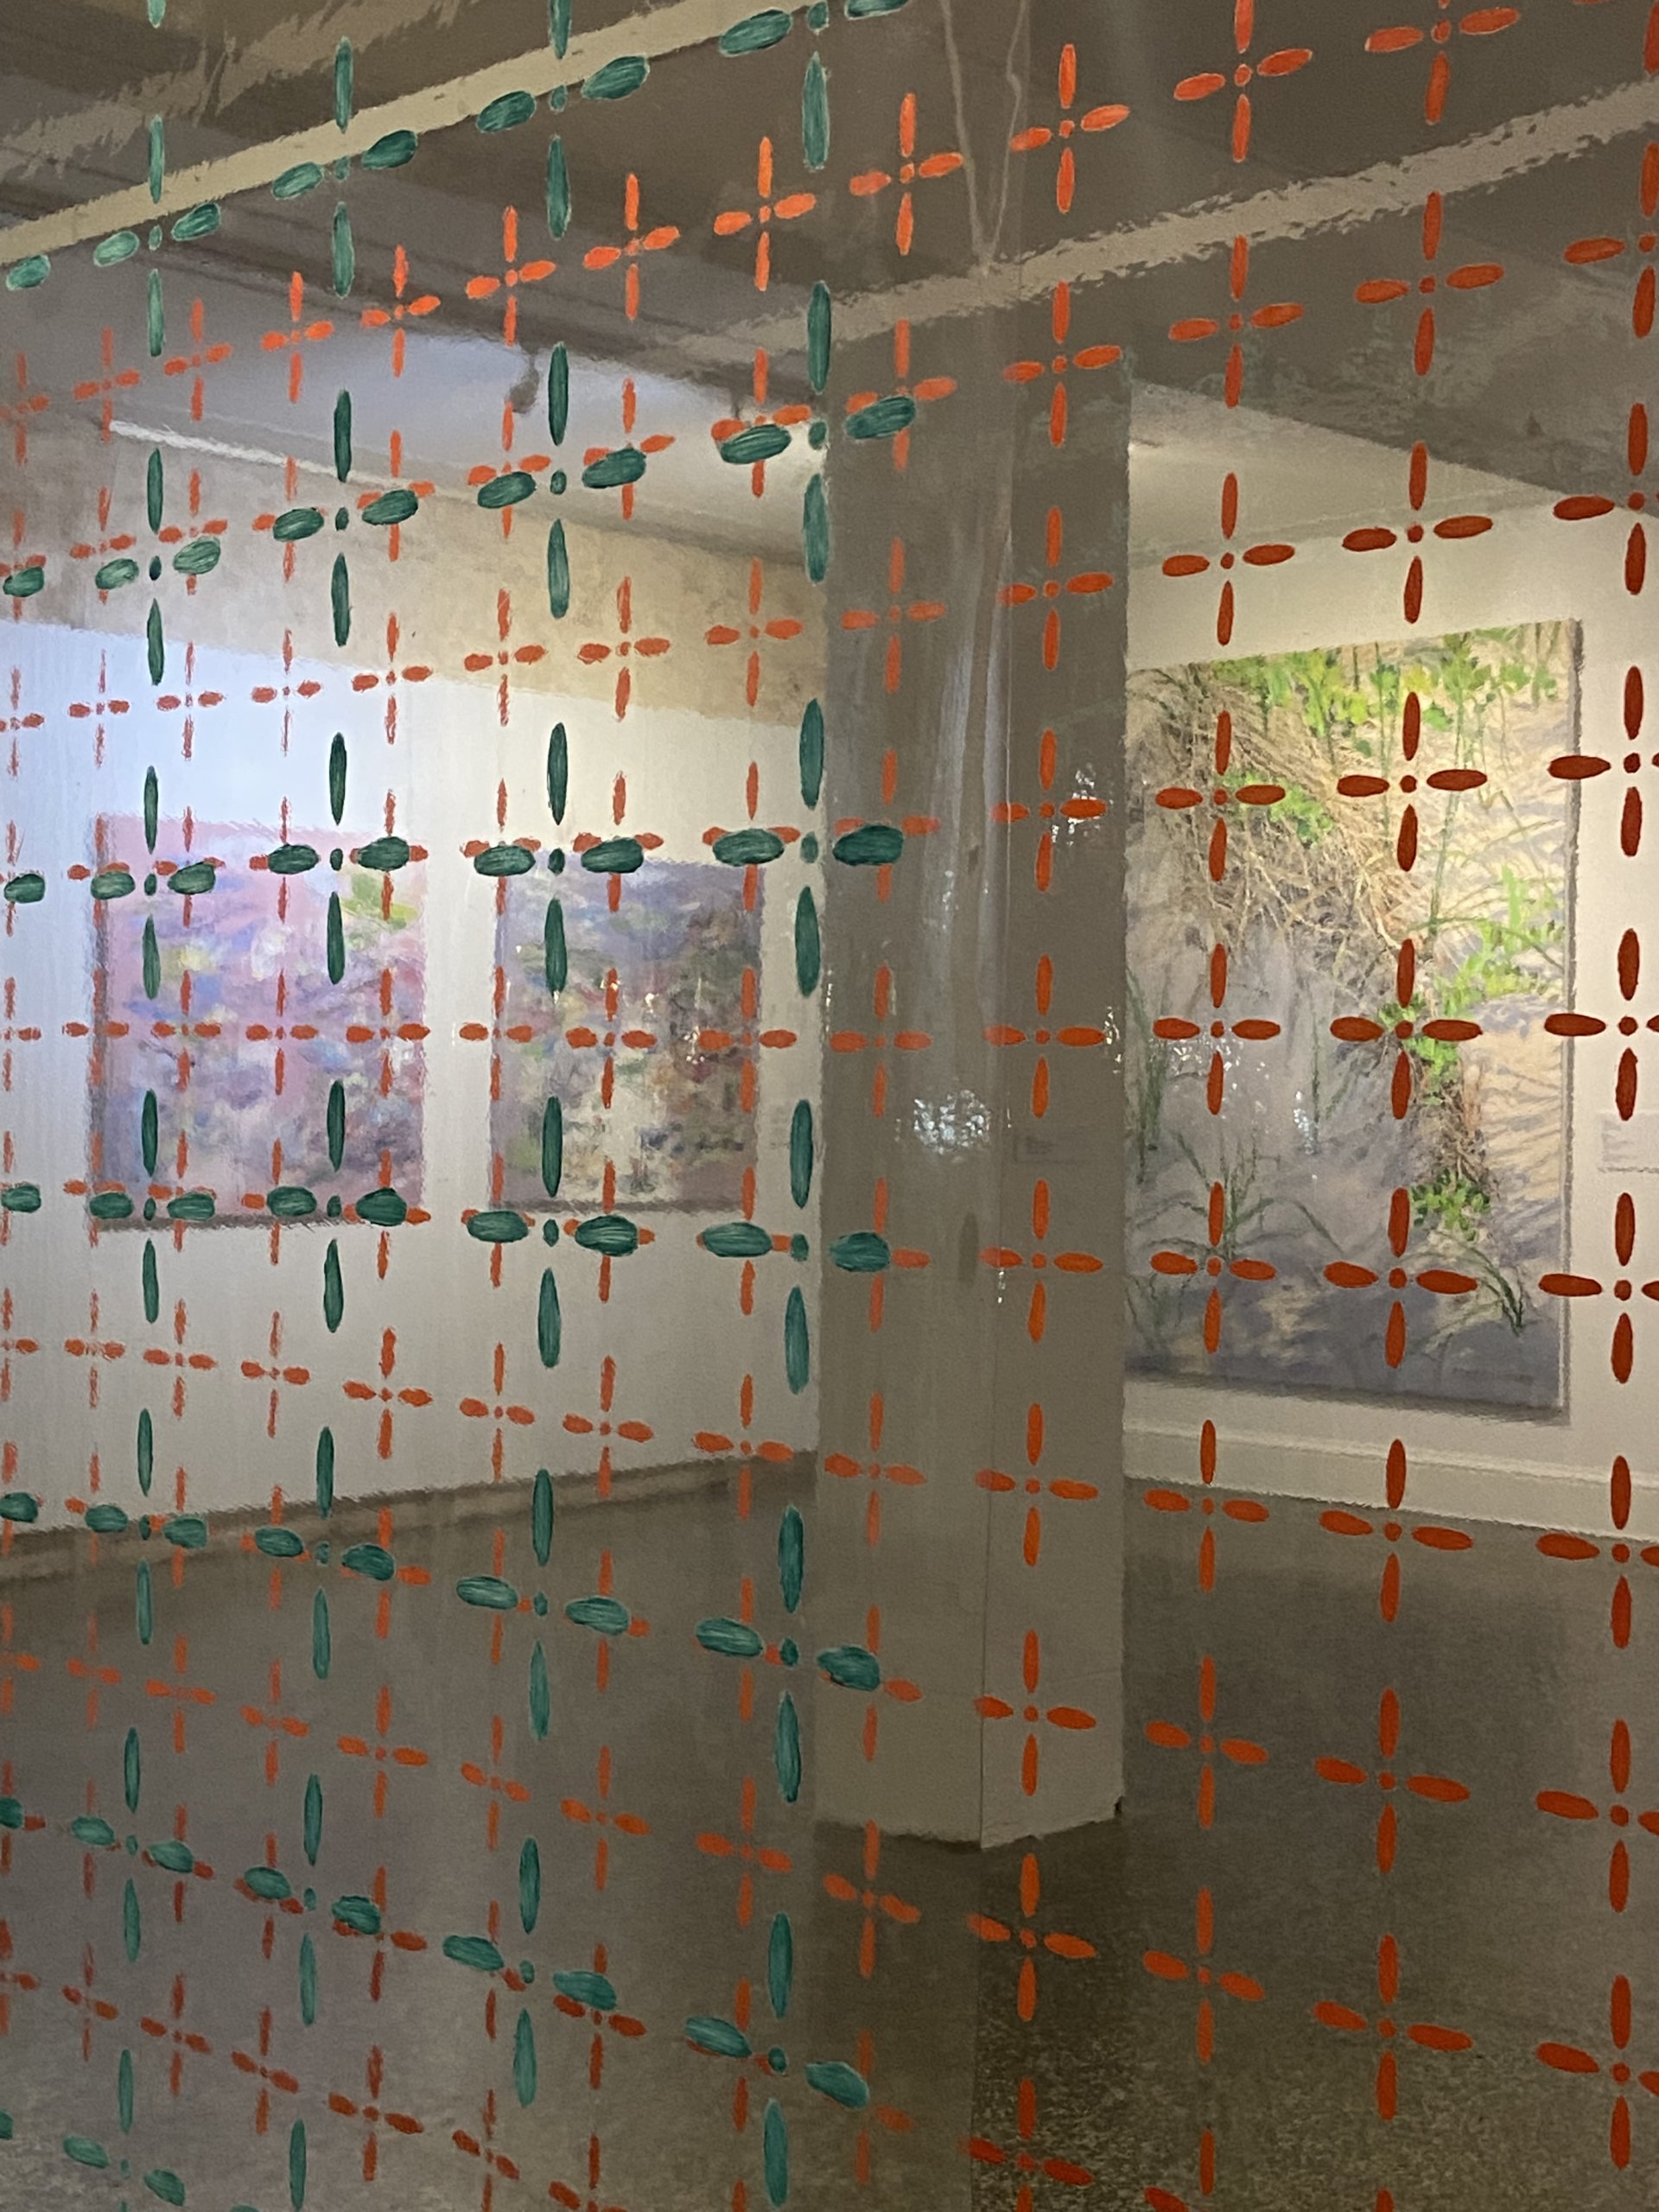 Mark Perry's installation at Coral Gables Museum